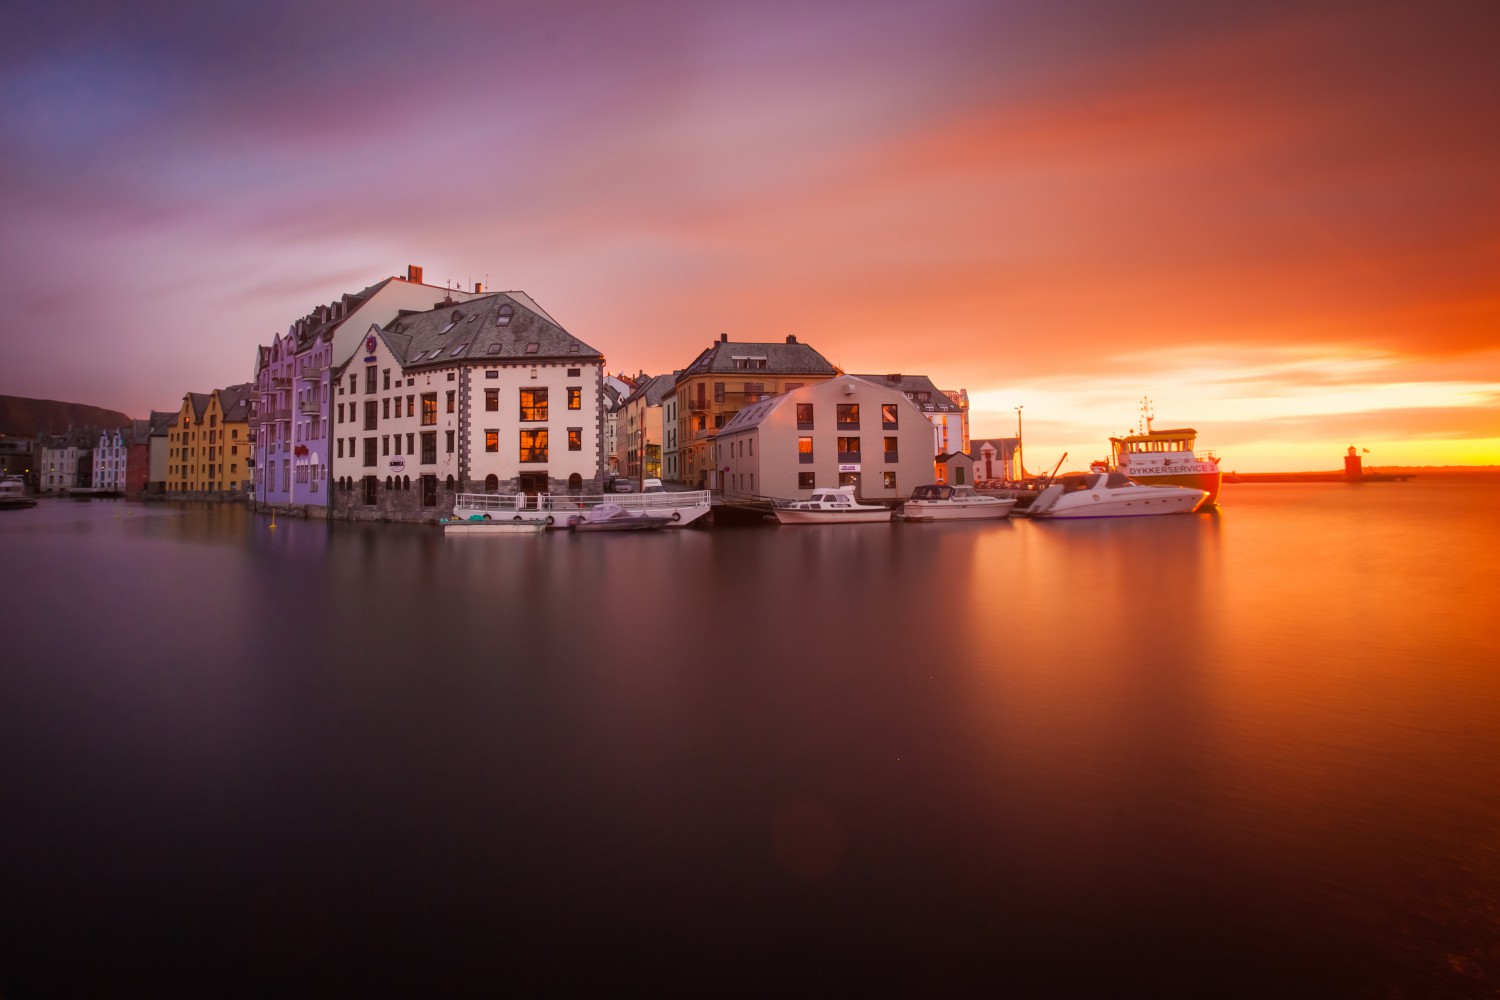 The sun setting behind the art nouveau buildings along Alesund's waterfront lights up the sky in myriad hues